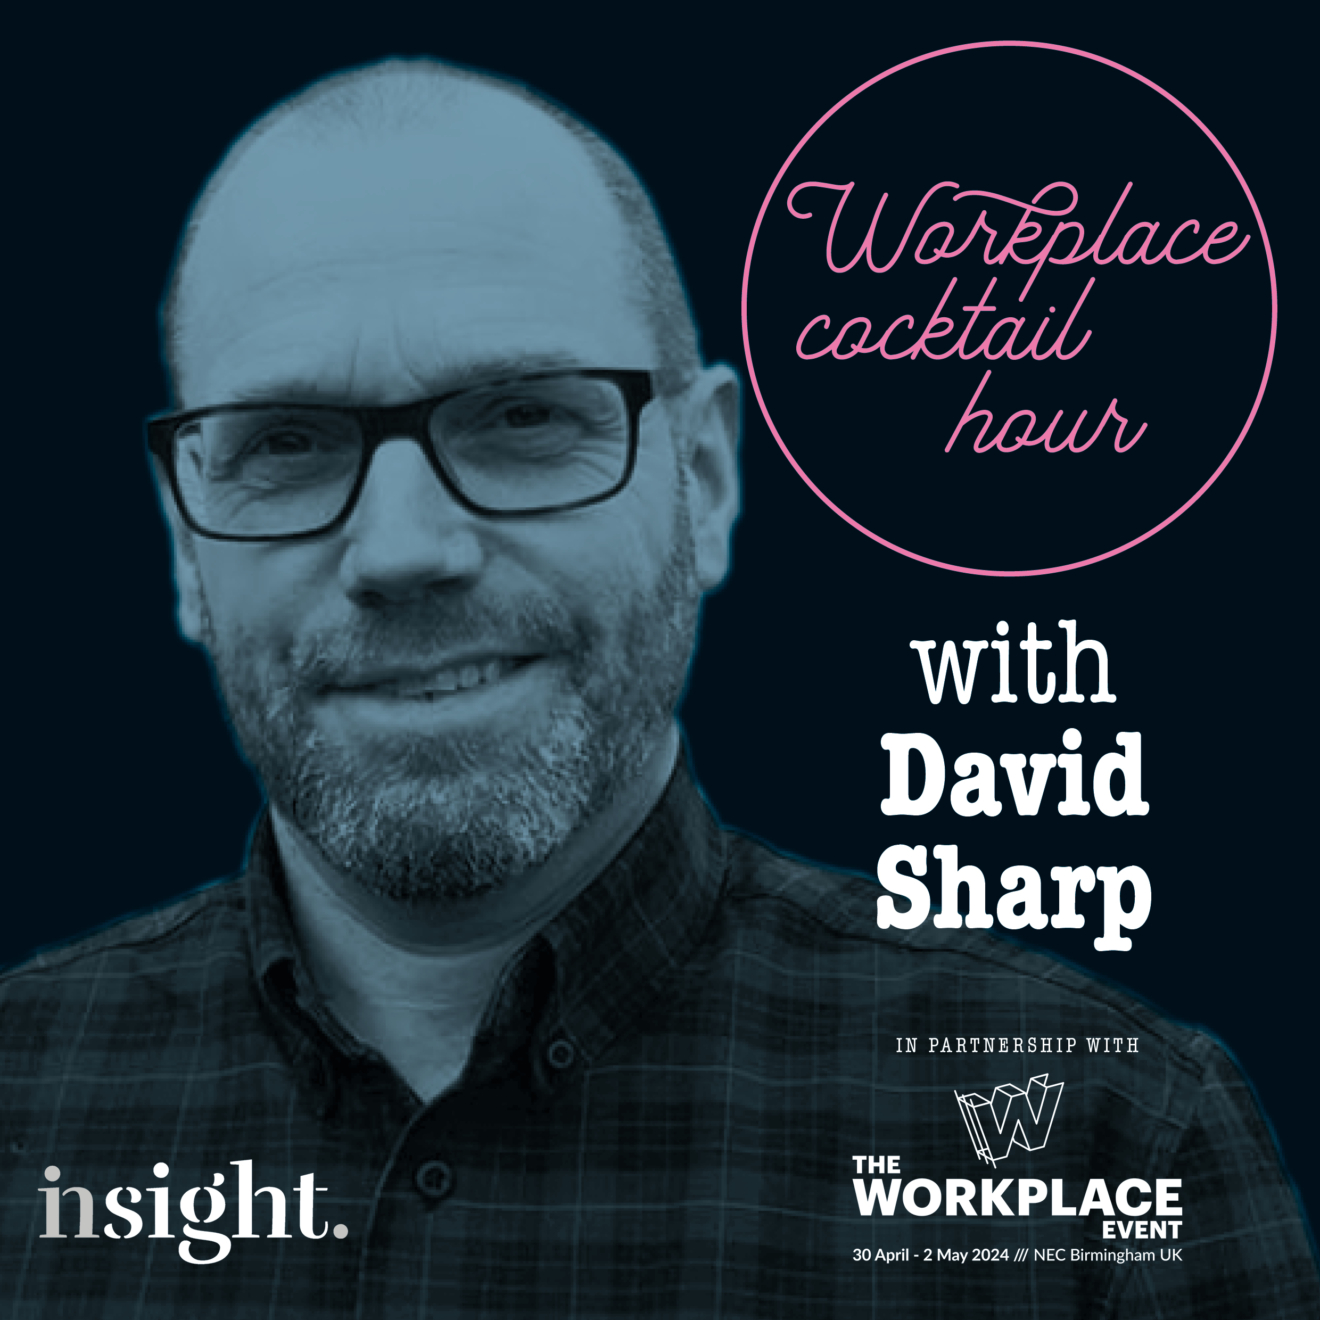 The only way is ethics ... the Workplace Cocktail Hour with David Sharp